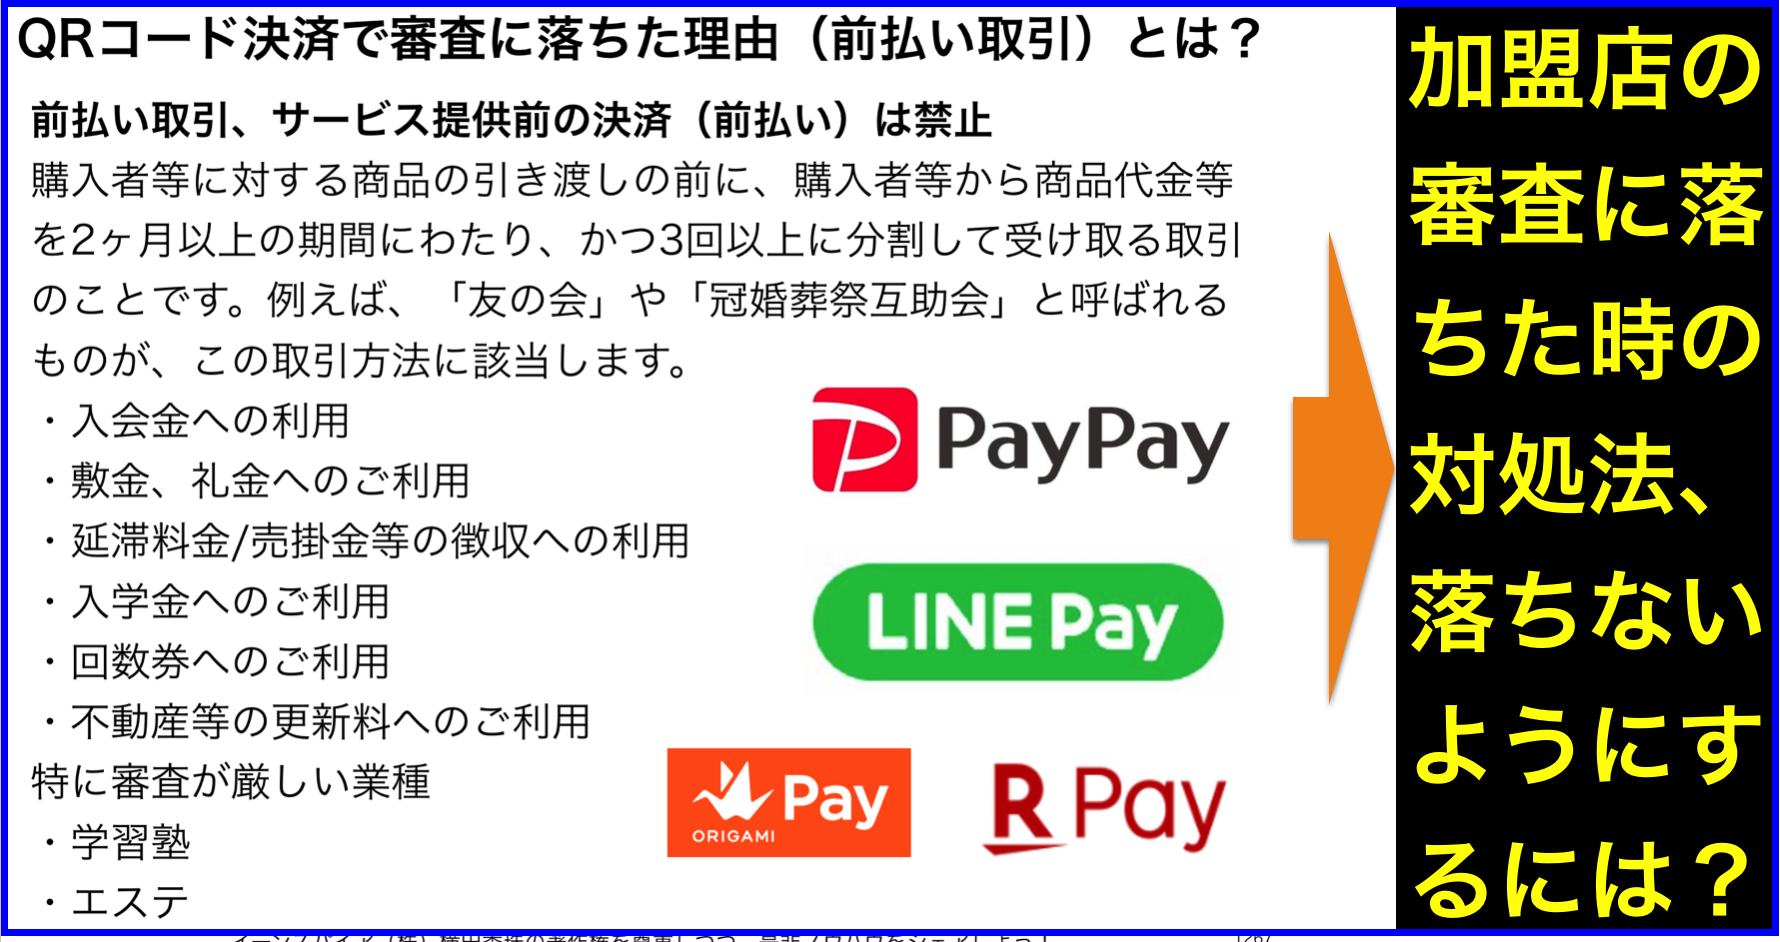 PayPay･LINE Pay･楽天Pay加盟店審査に落ちた前払い取引